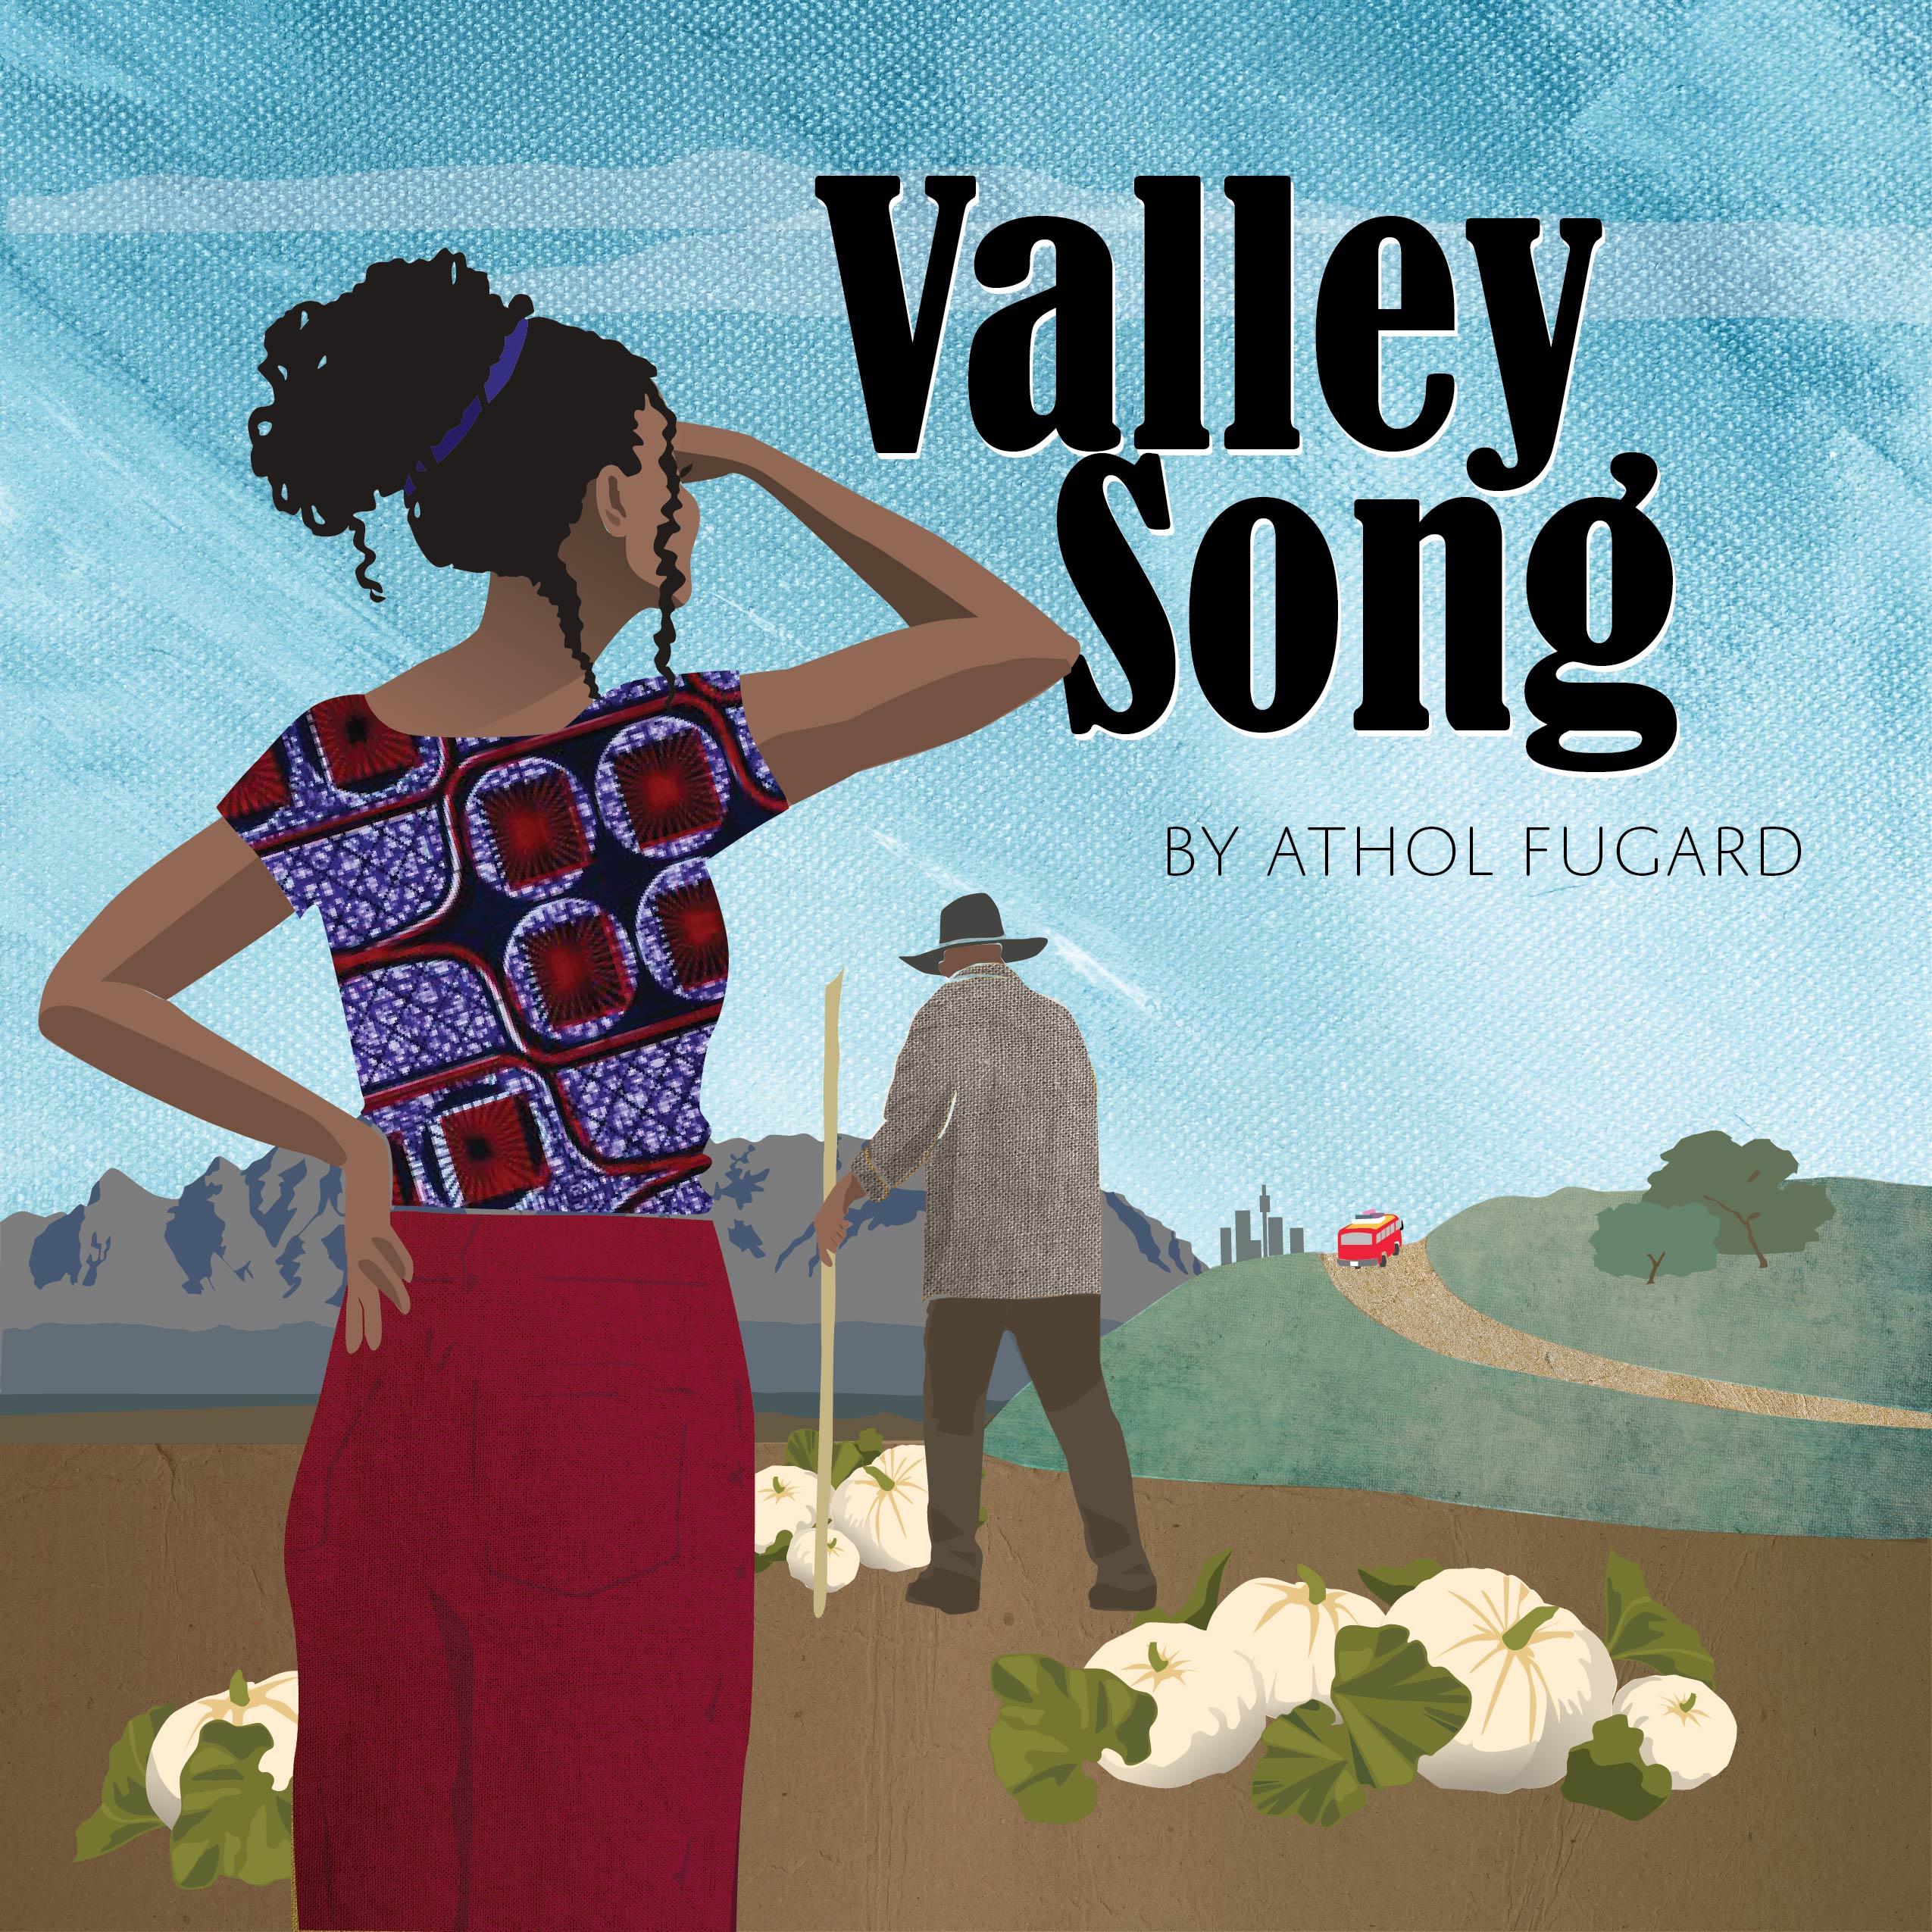 Valley Song by Athol Fugard at ICT